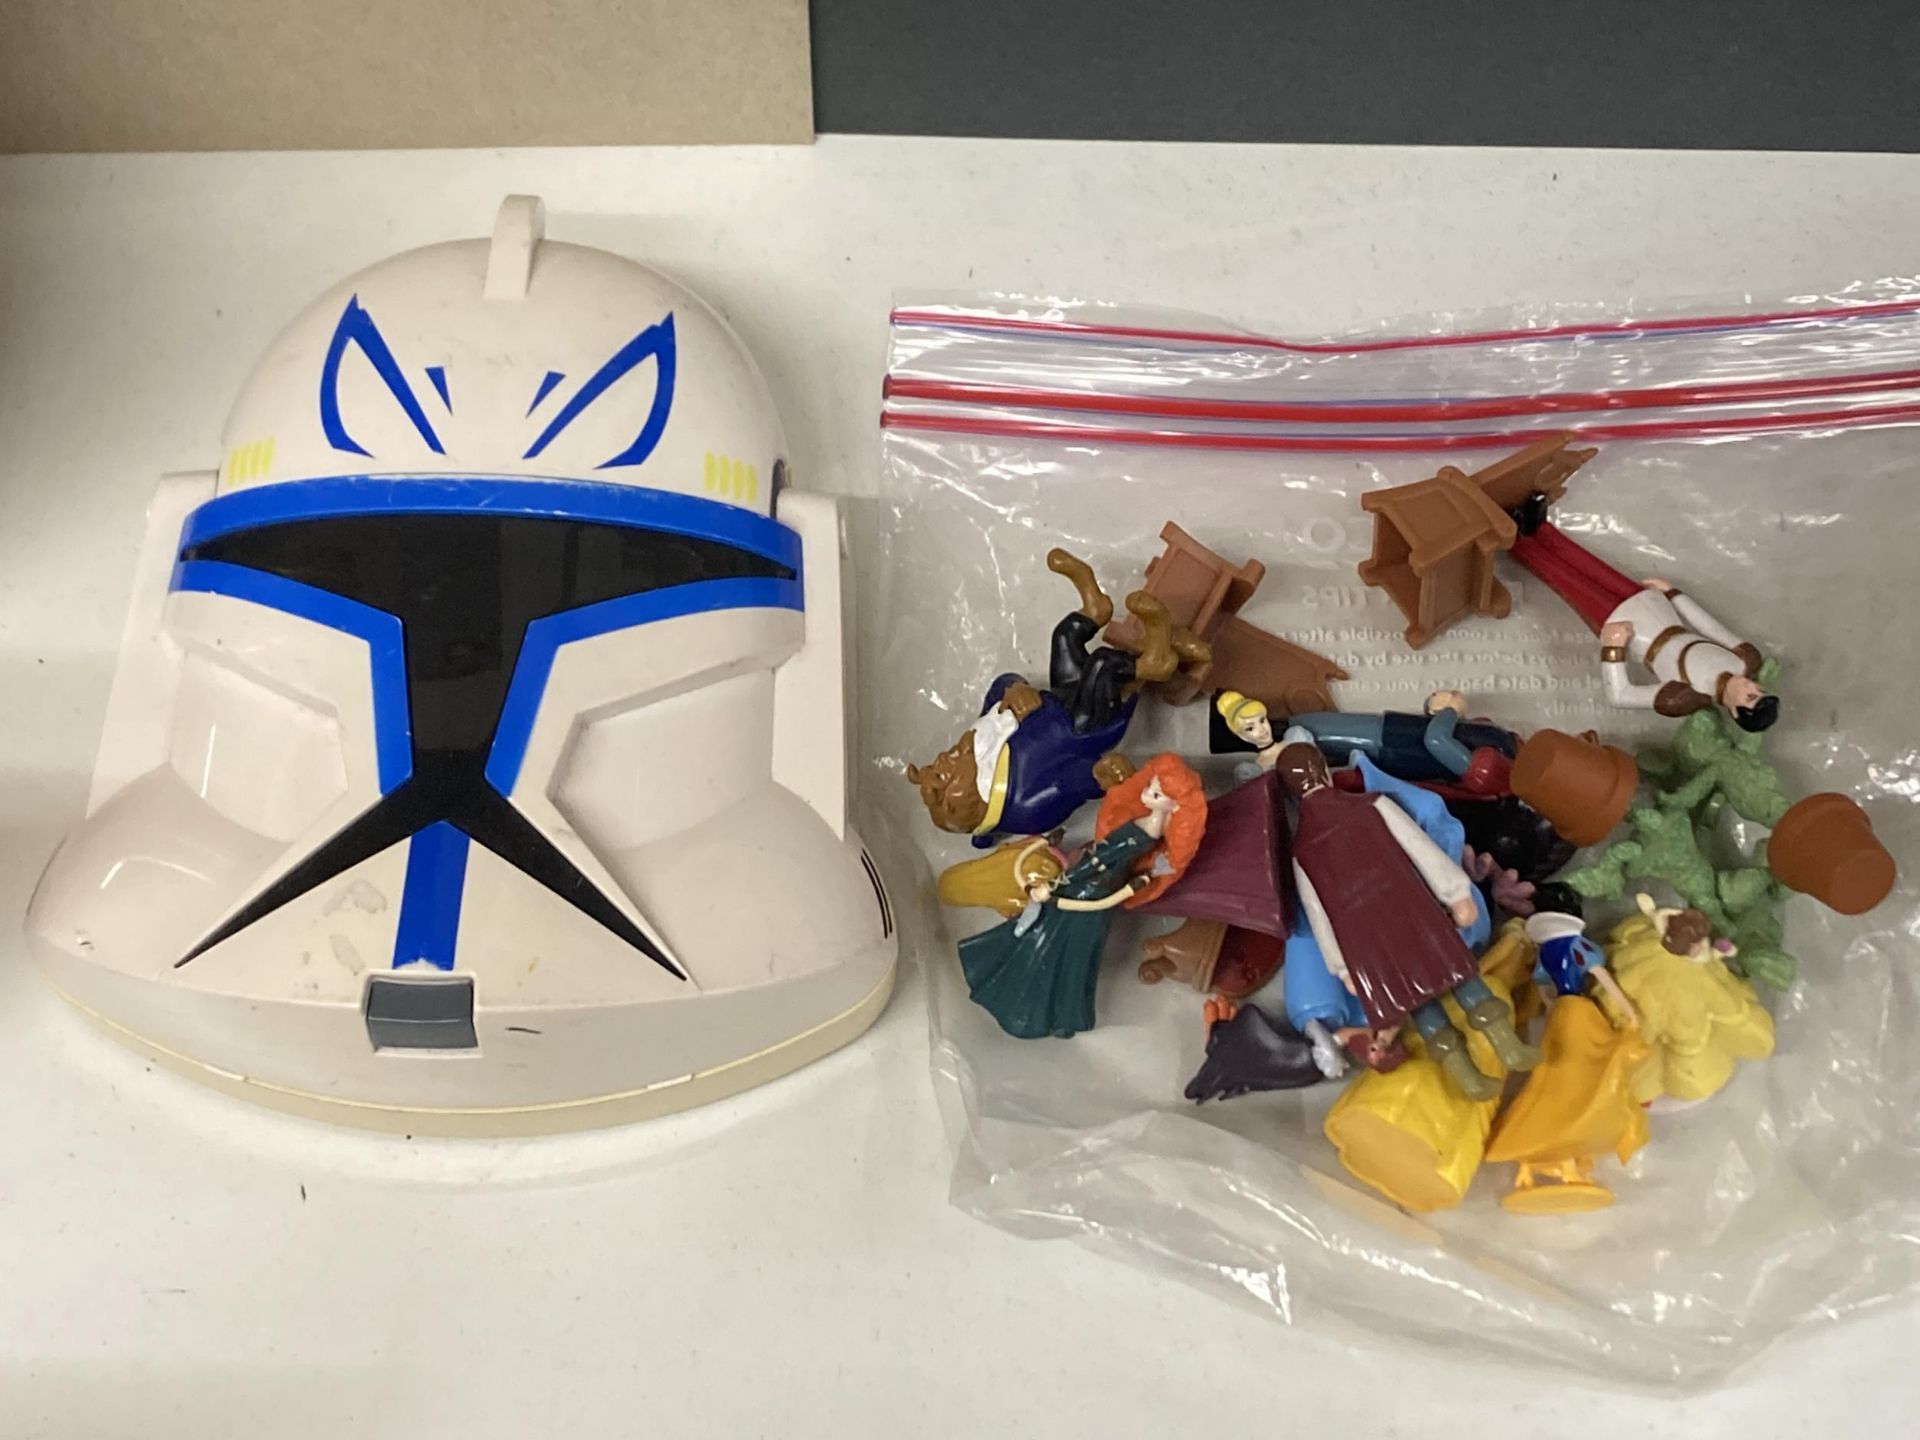 VARIOUS FIGURES TO INCLUDE A STAR WARS, THE CLONE WARS, CAPTAIN REX COMPUTER, PLUS A COLLECTION OF